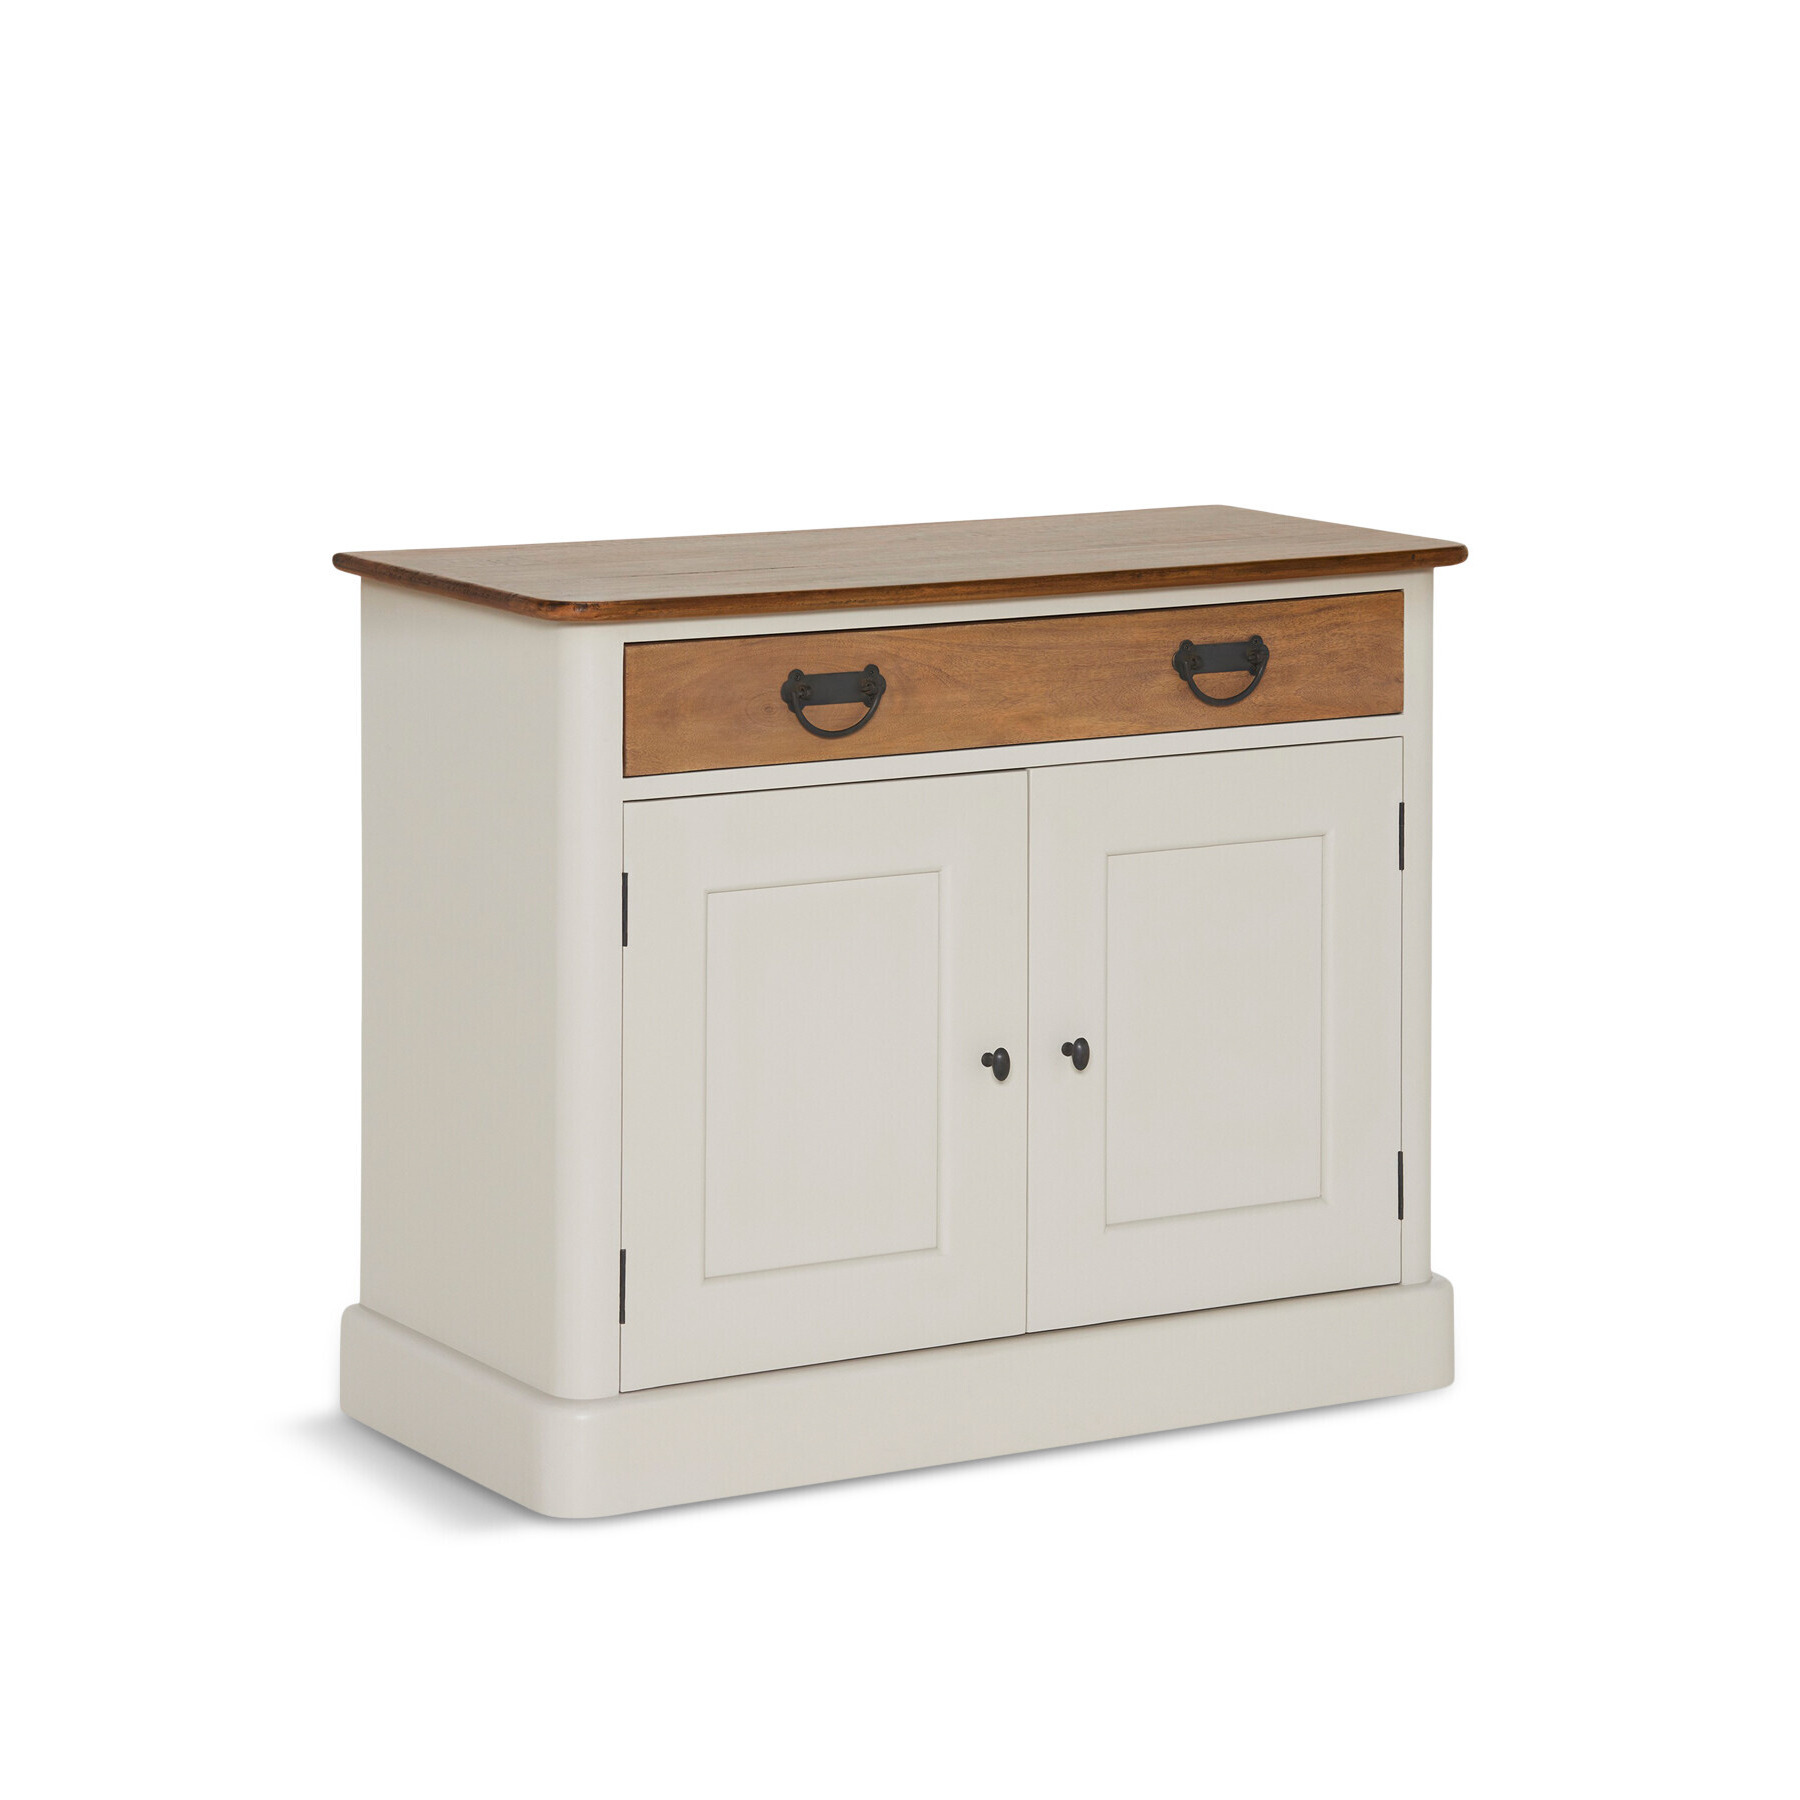 Barker and Stonehouse Mara 1 Drawer 2 Door Sideboard White - image 1